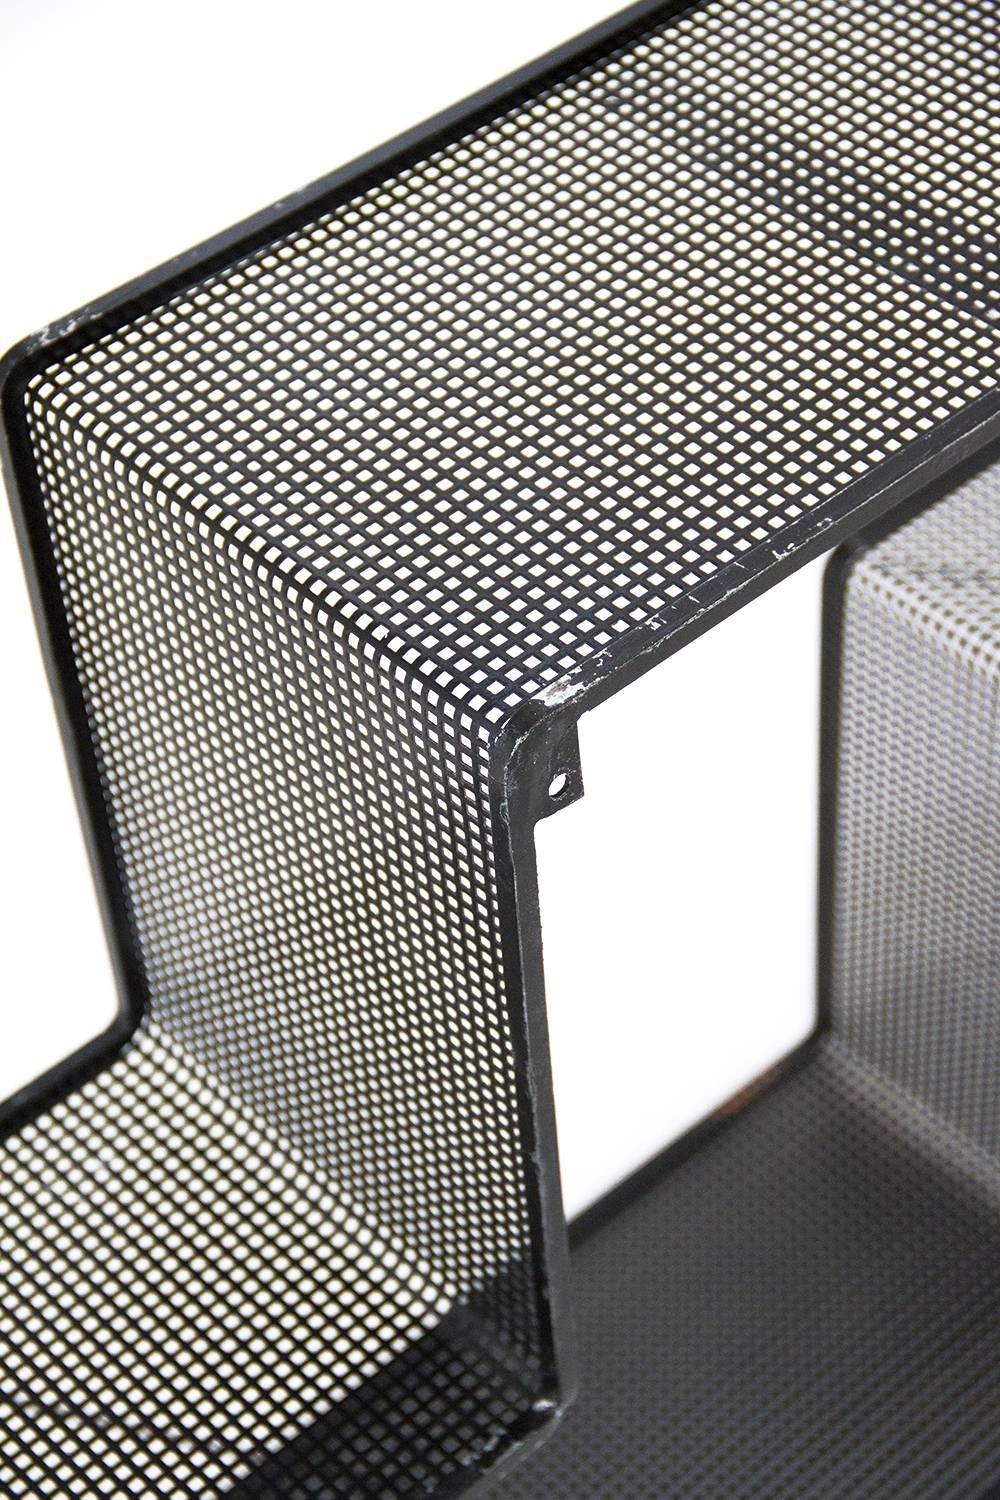 Mid-20th Century Black Dedal Wall Shelf by Mathieu Mategot, Perforated Steel, circa 1950, France